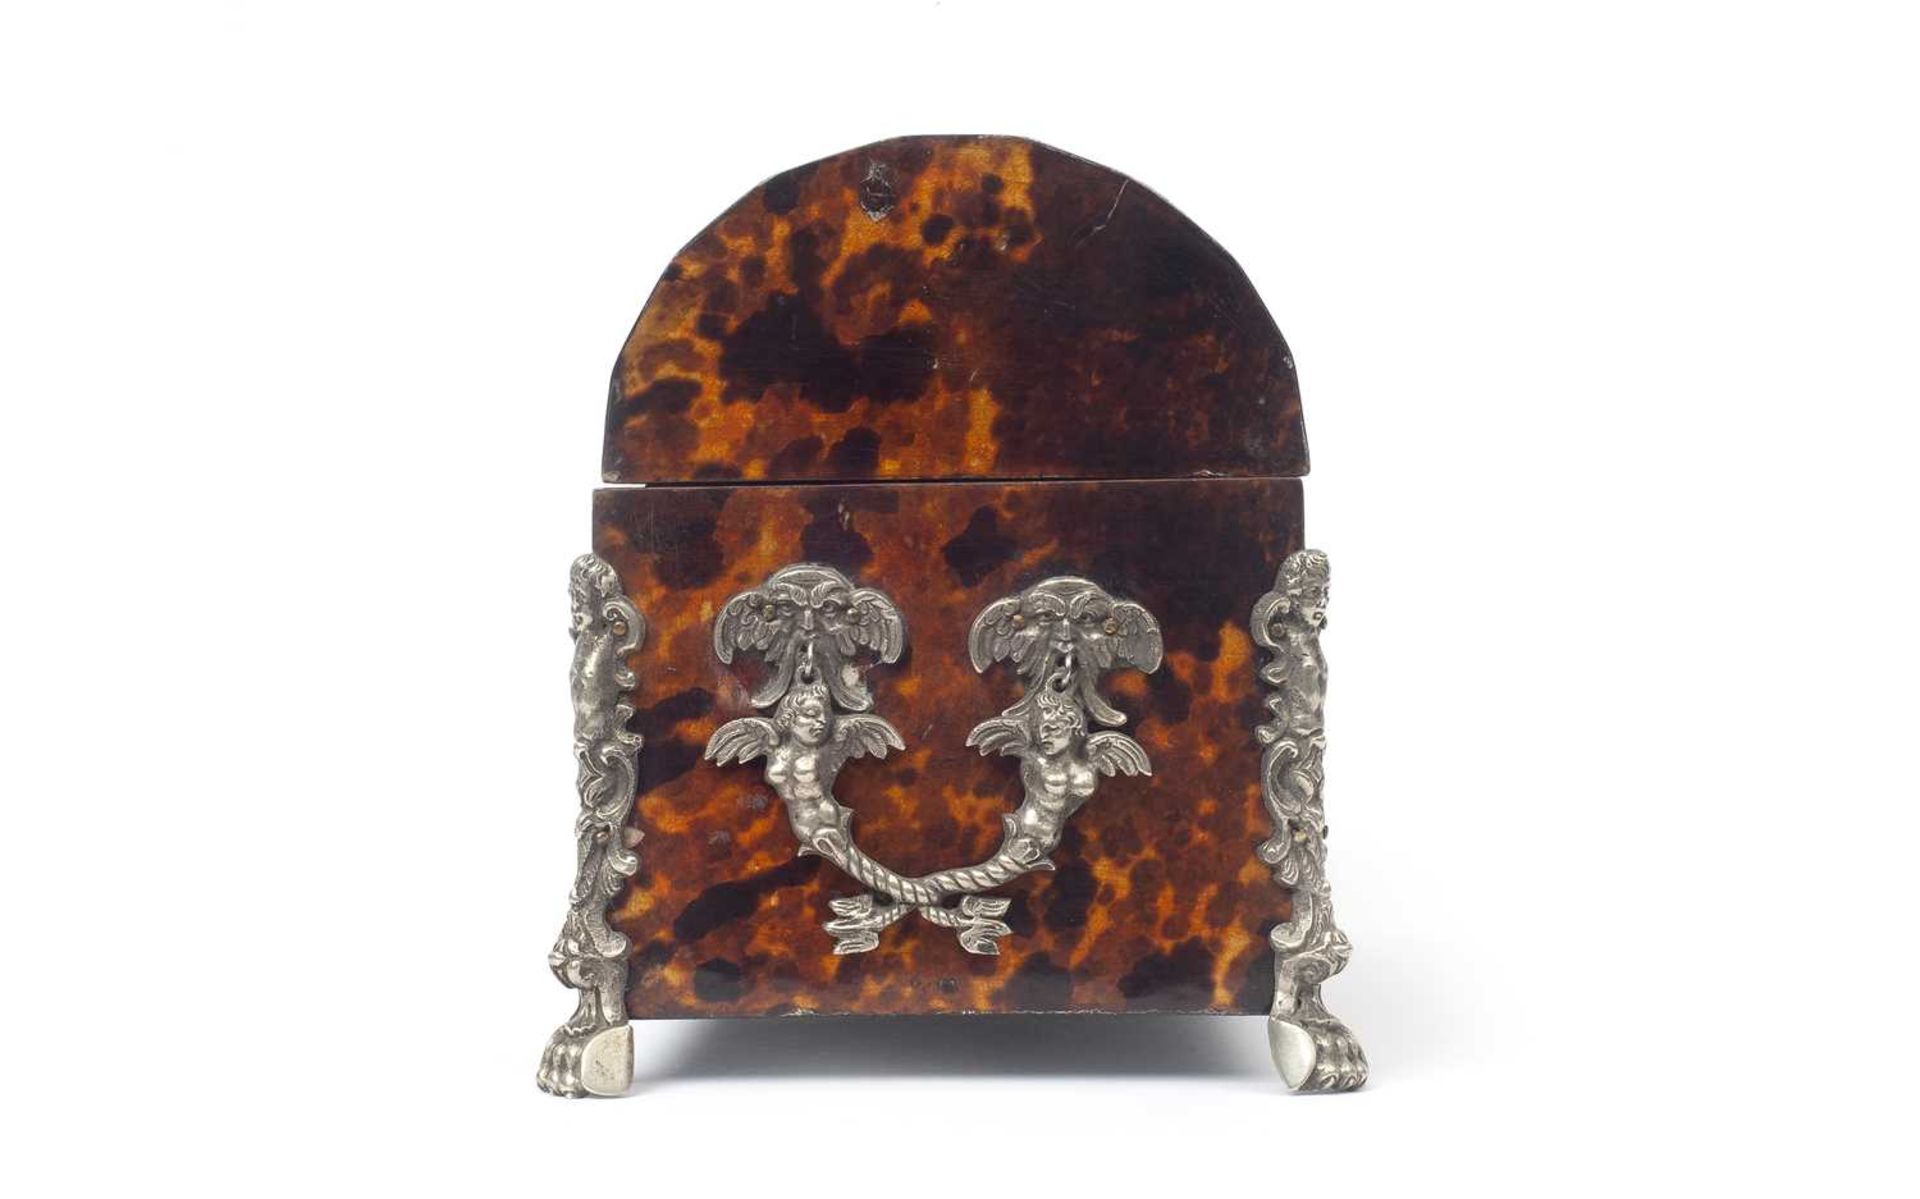 AN 18TH CENTURY DUTCH COLONIAL TORTOISESHELL AND SILVERED METAL MOUNTED CASKET - Image 4 of 4